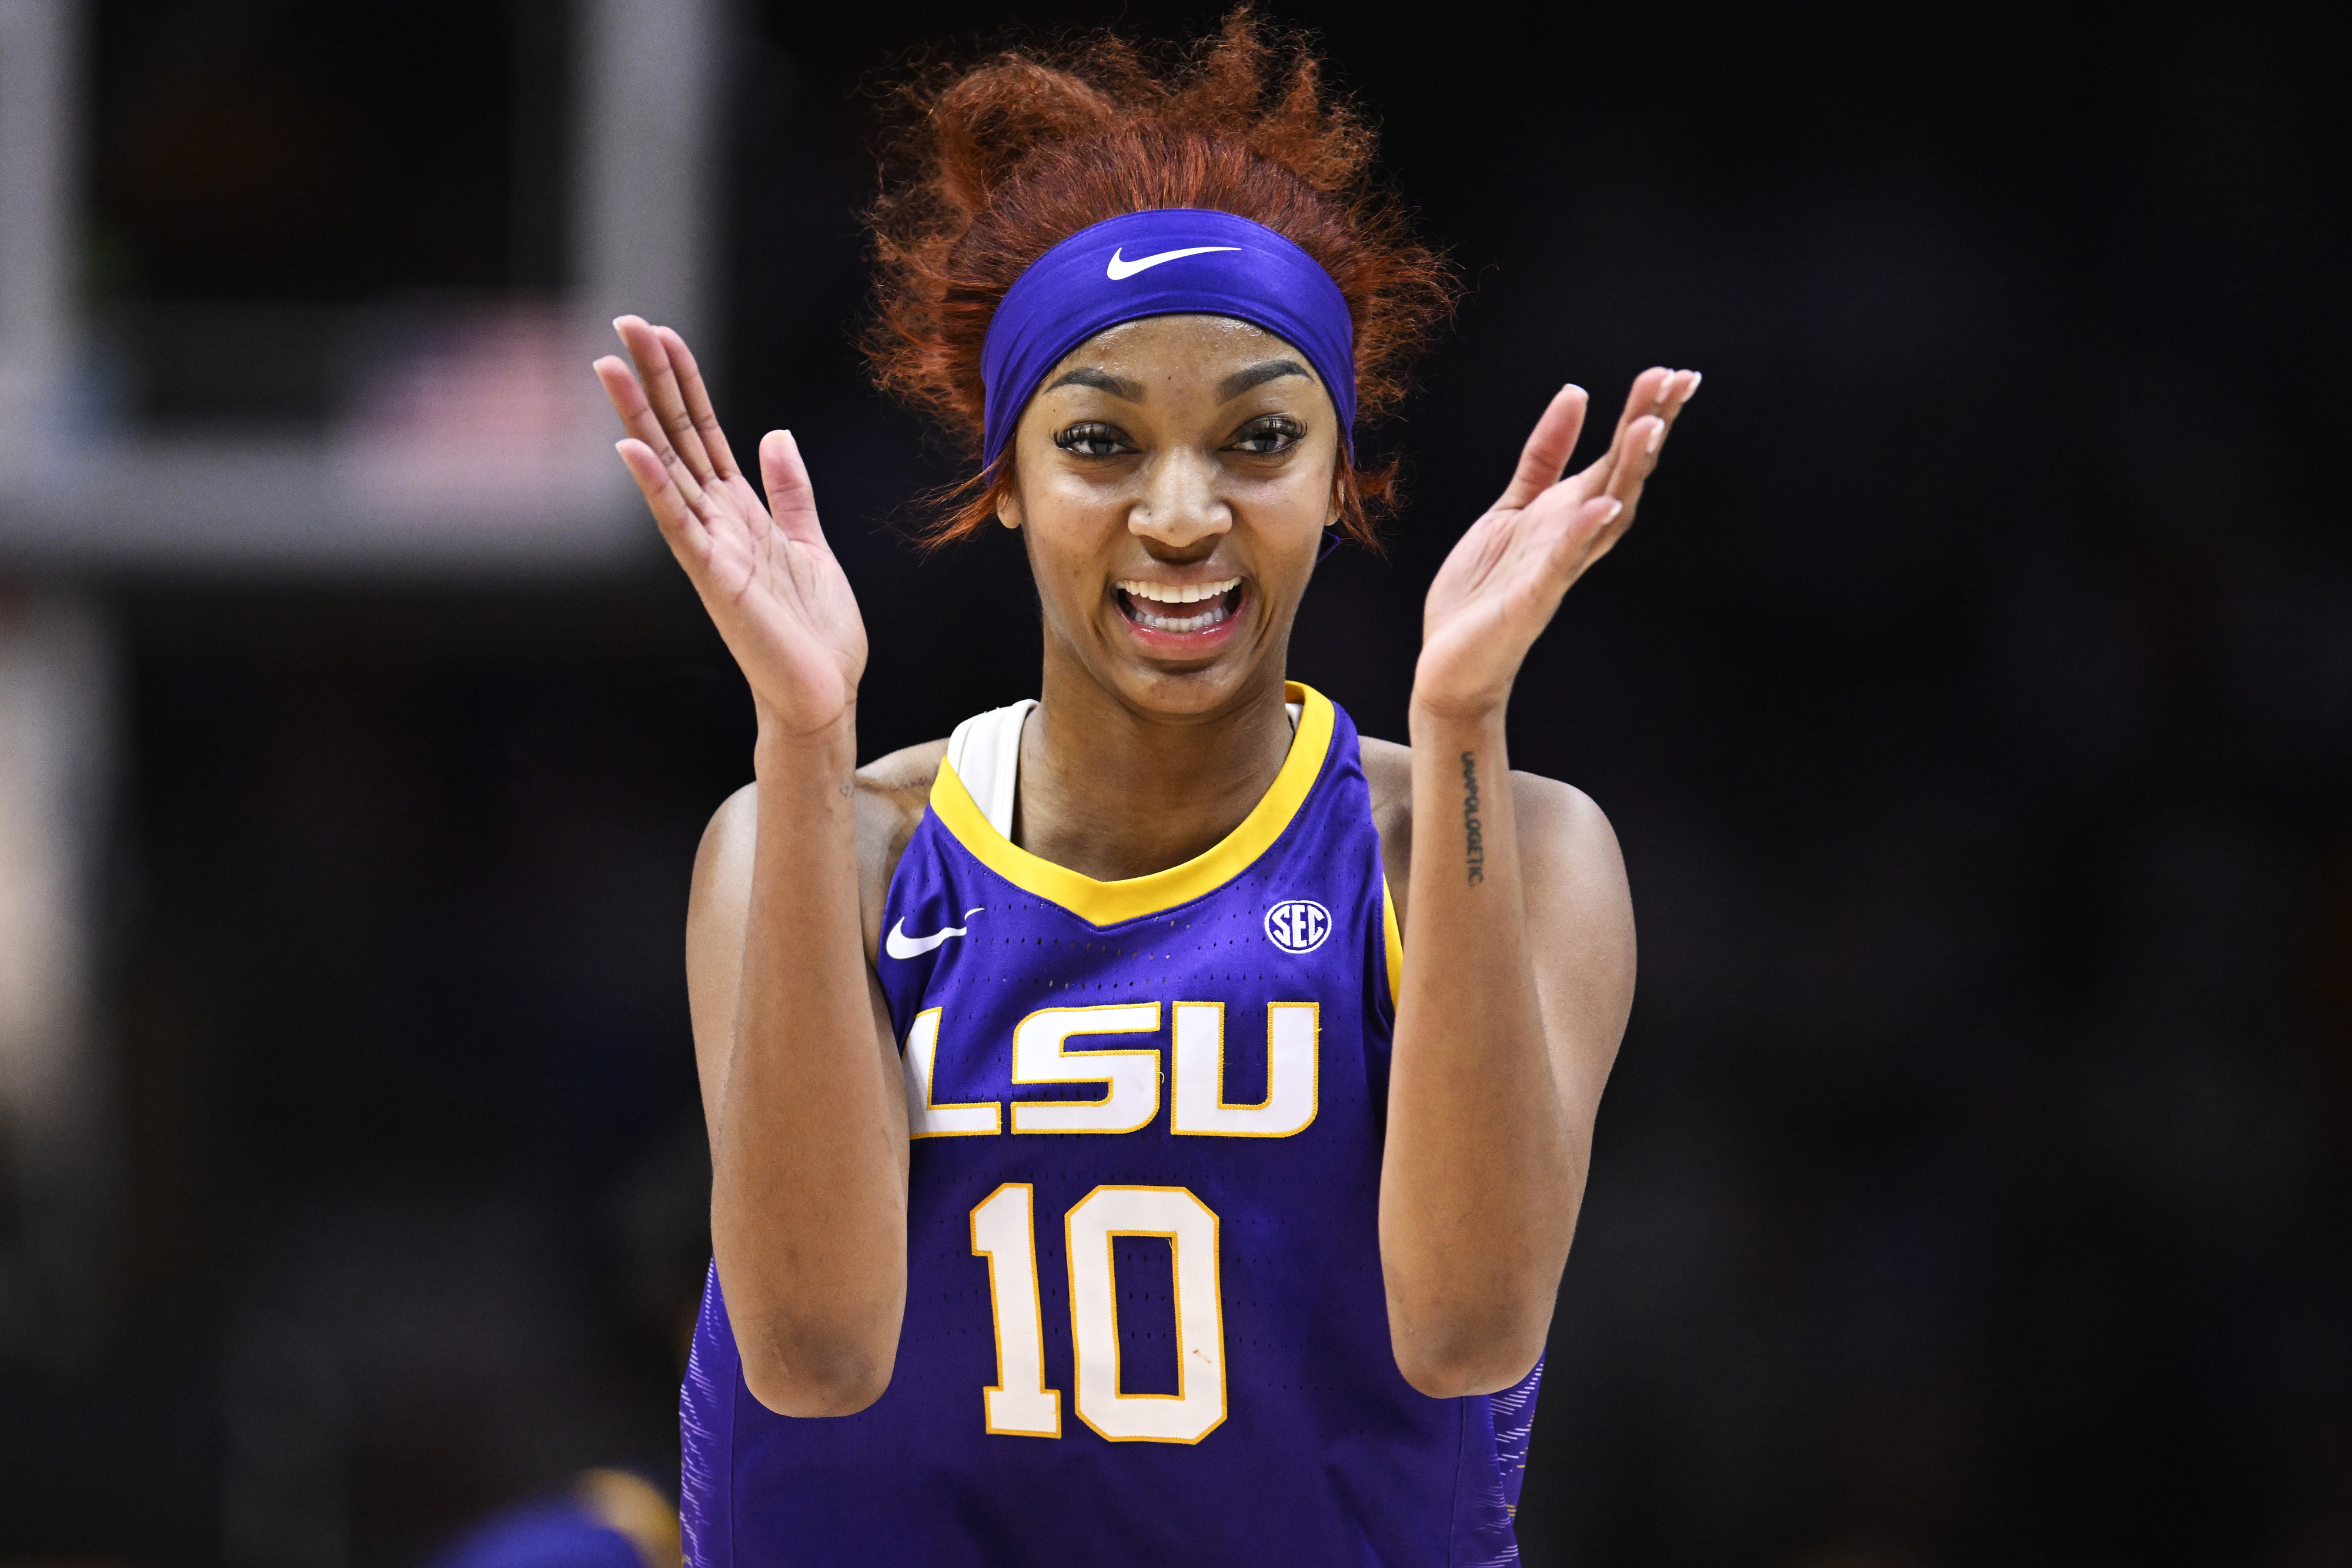 LSU basketball player in uniform gestures with excitement on the court